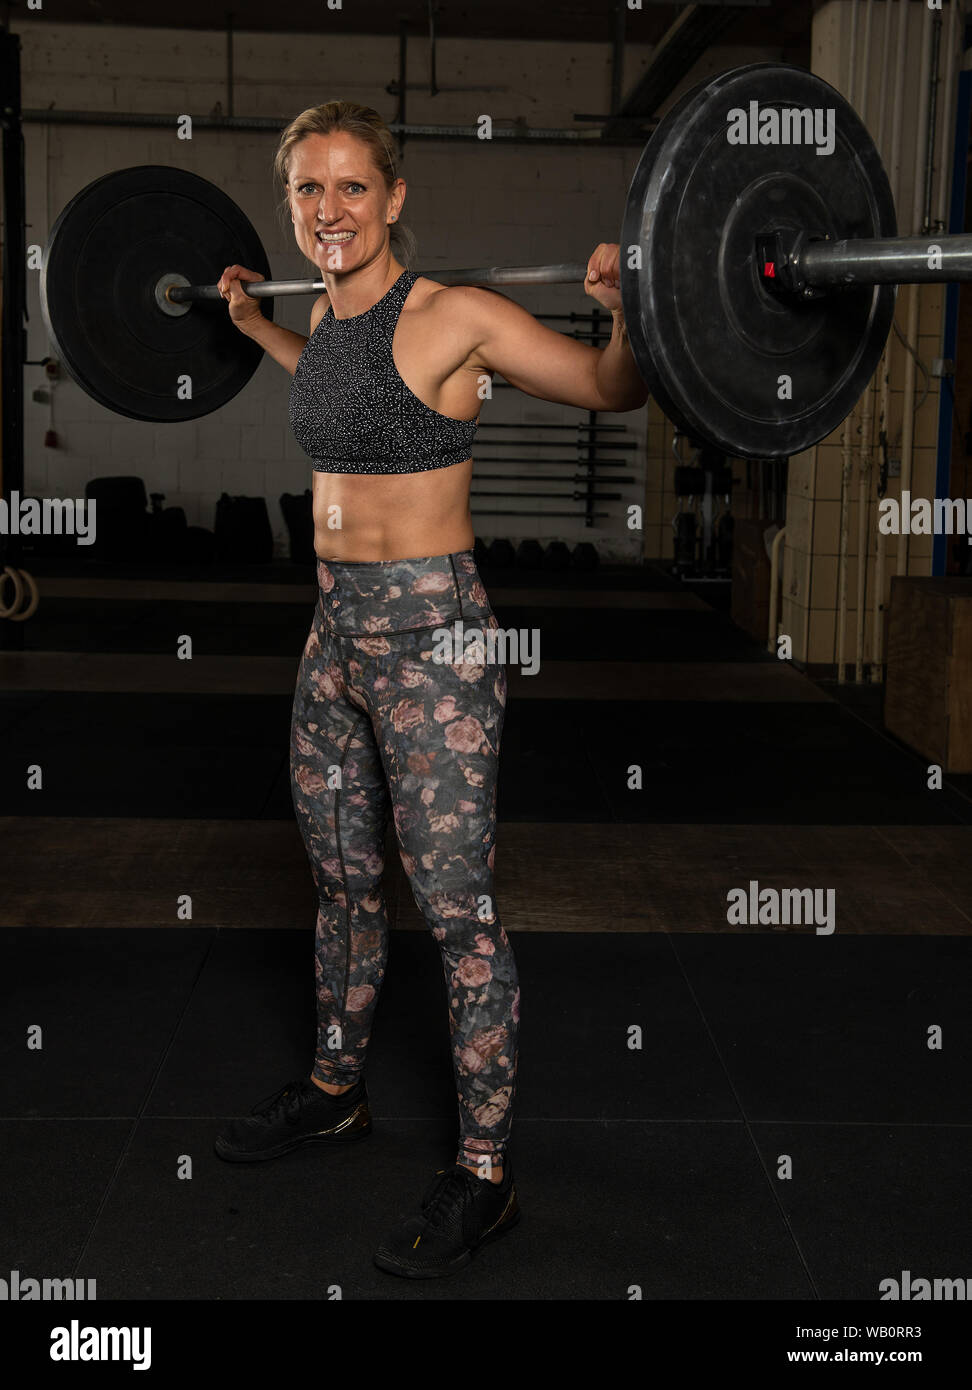 A beautiful middle aged blonde woman with Sixpack is doing back squats with the barbell. Functional fitness and weight lifting workout in a gym. Stock Photo